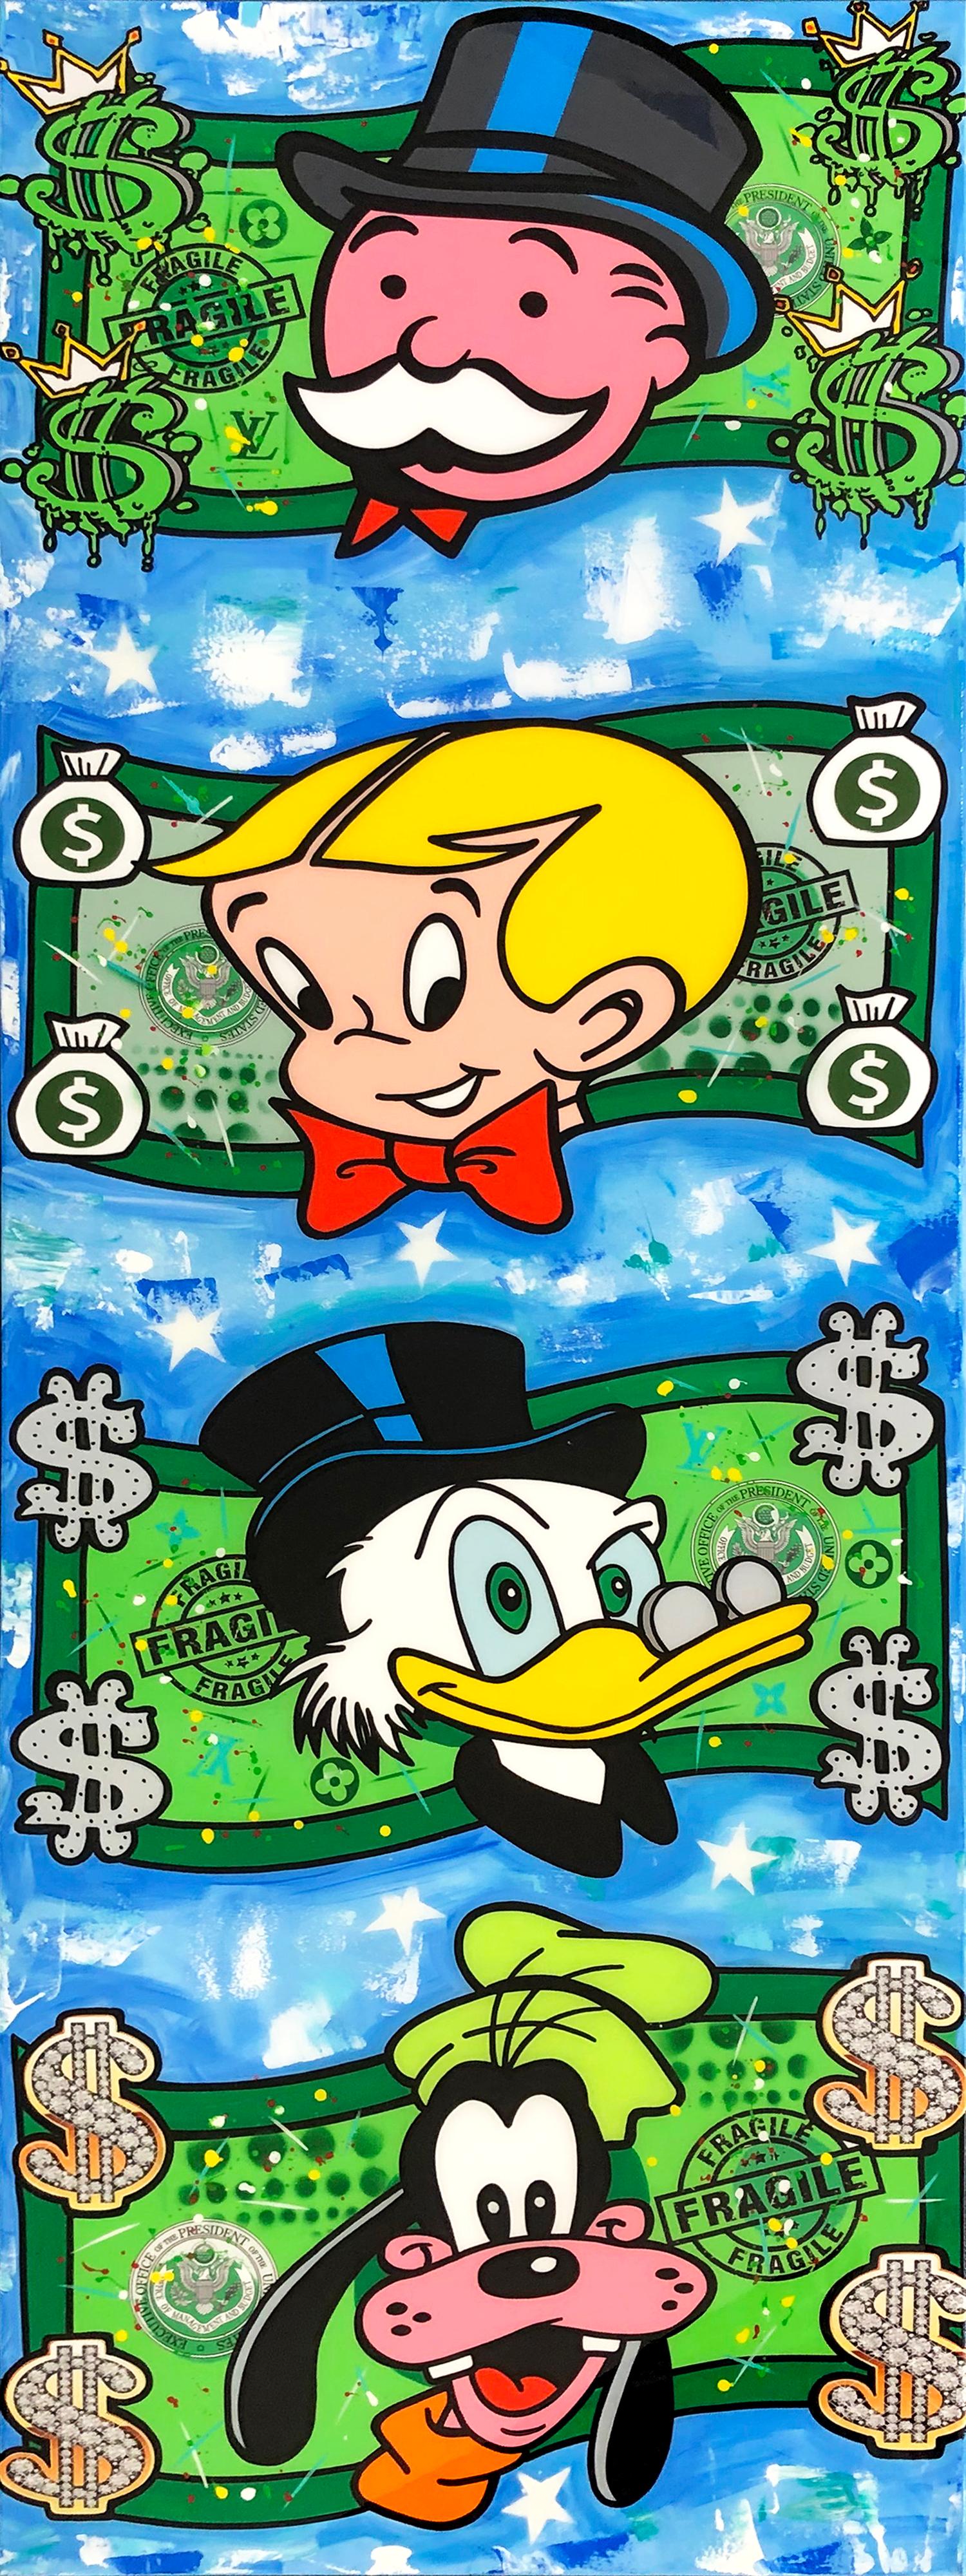 Jozza Abstract Painting - CASH ONLY I (RICHIE RICH GOOFY)